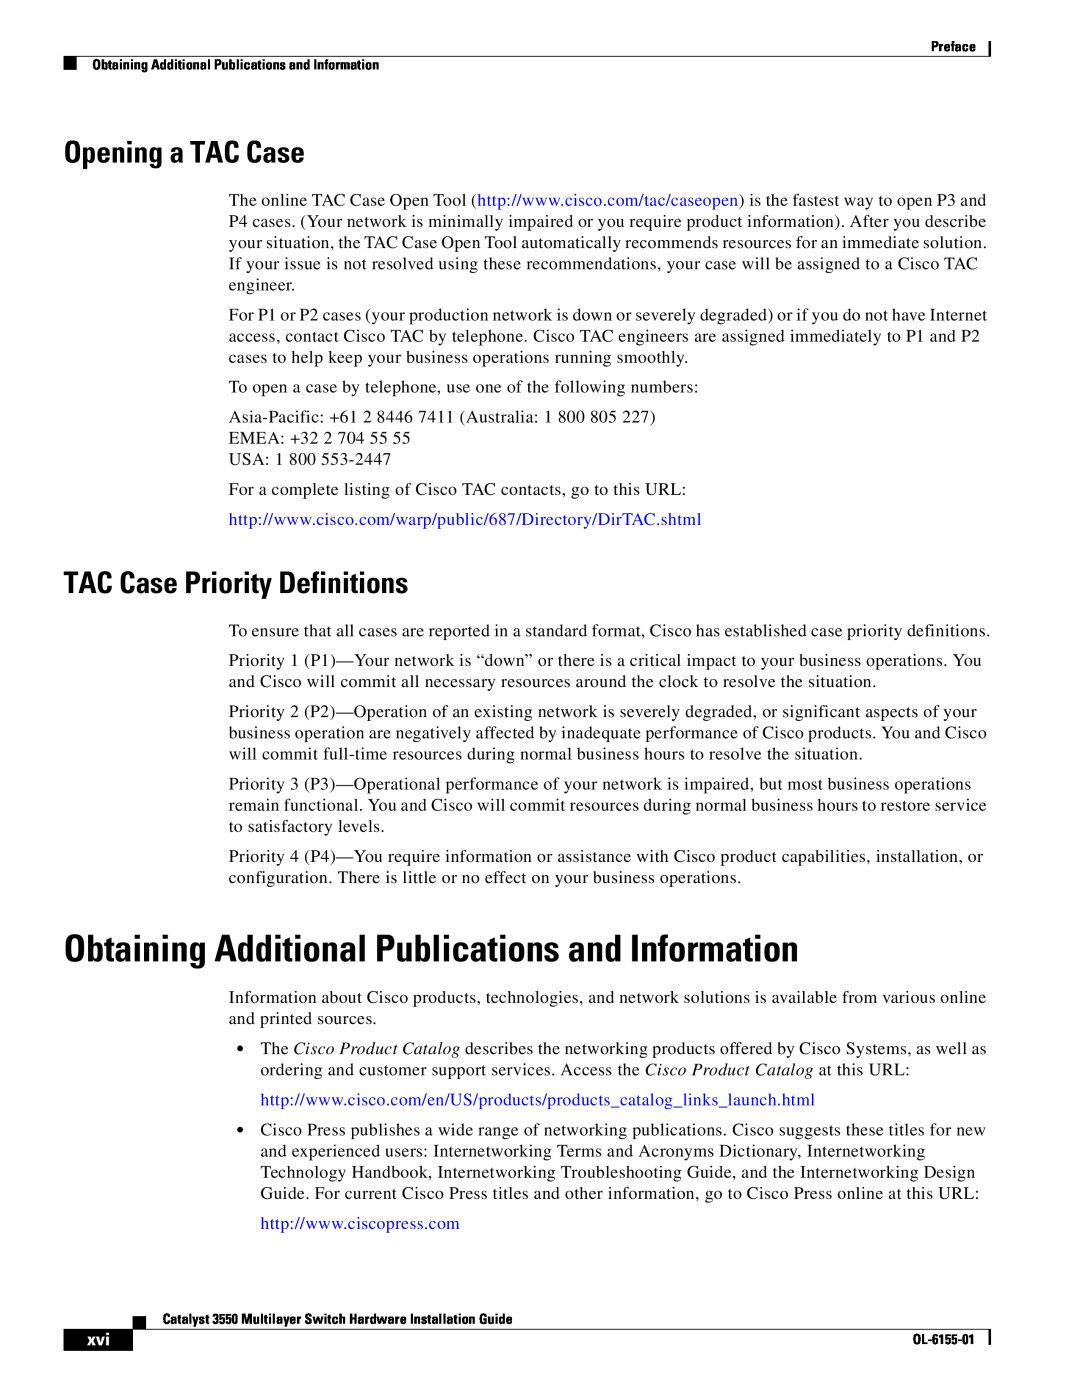 Cisco Systems 3550 Obtaining Additional Publications and Information, Opening a TAC Case, TAC Case Priority Definitions 